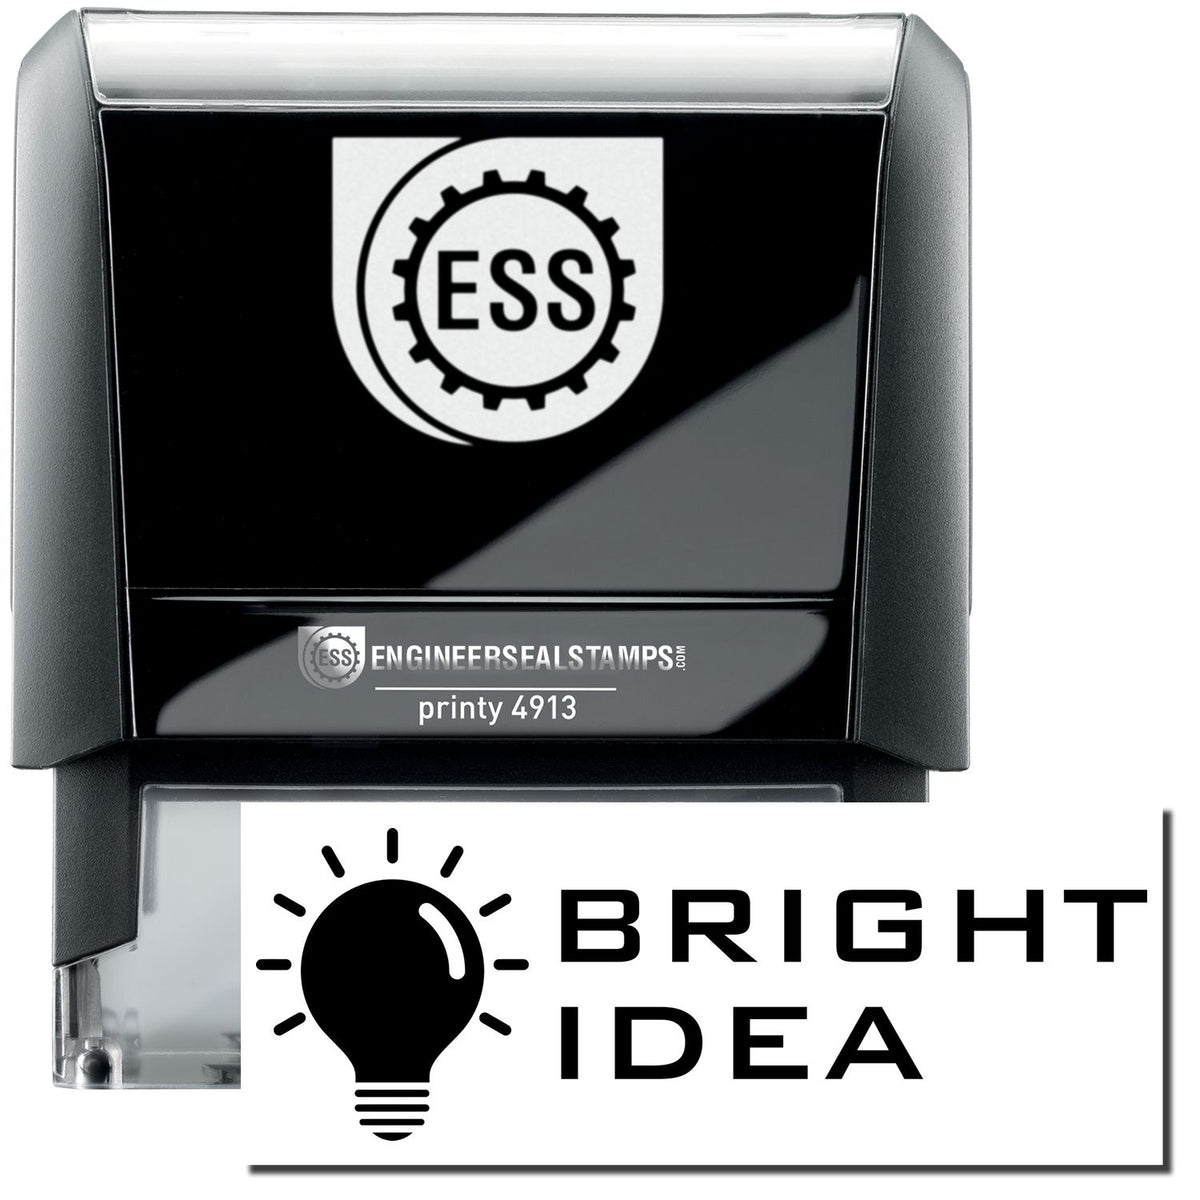 A self-inking stamp with a stamped image showing how the text &quot;BRIGHT IDEA&quot; in a tech-style font with an image of a bright lightbulb on the left side of the text is displayed after stamping.